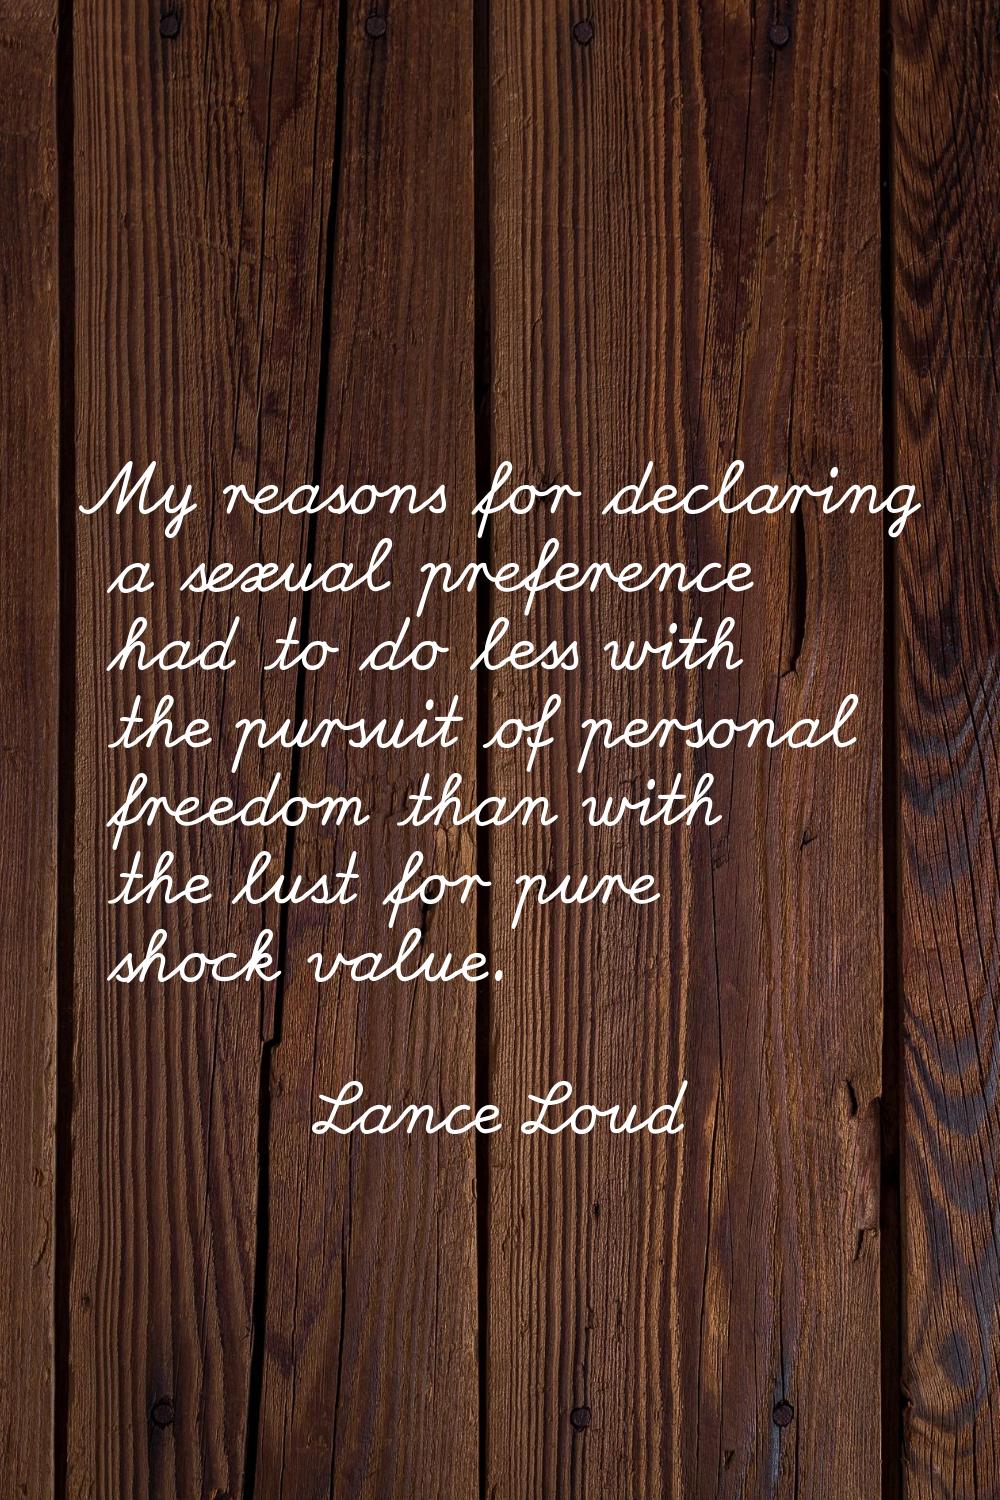 My reasons for declaring a sexual preference had to do less with the pursuit of personal freedom th